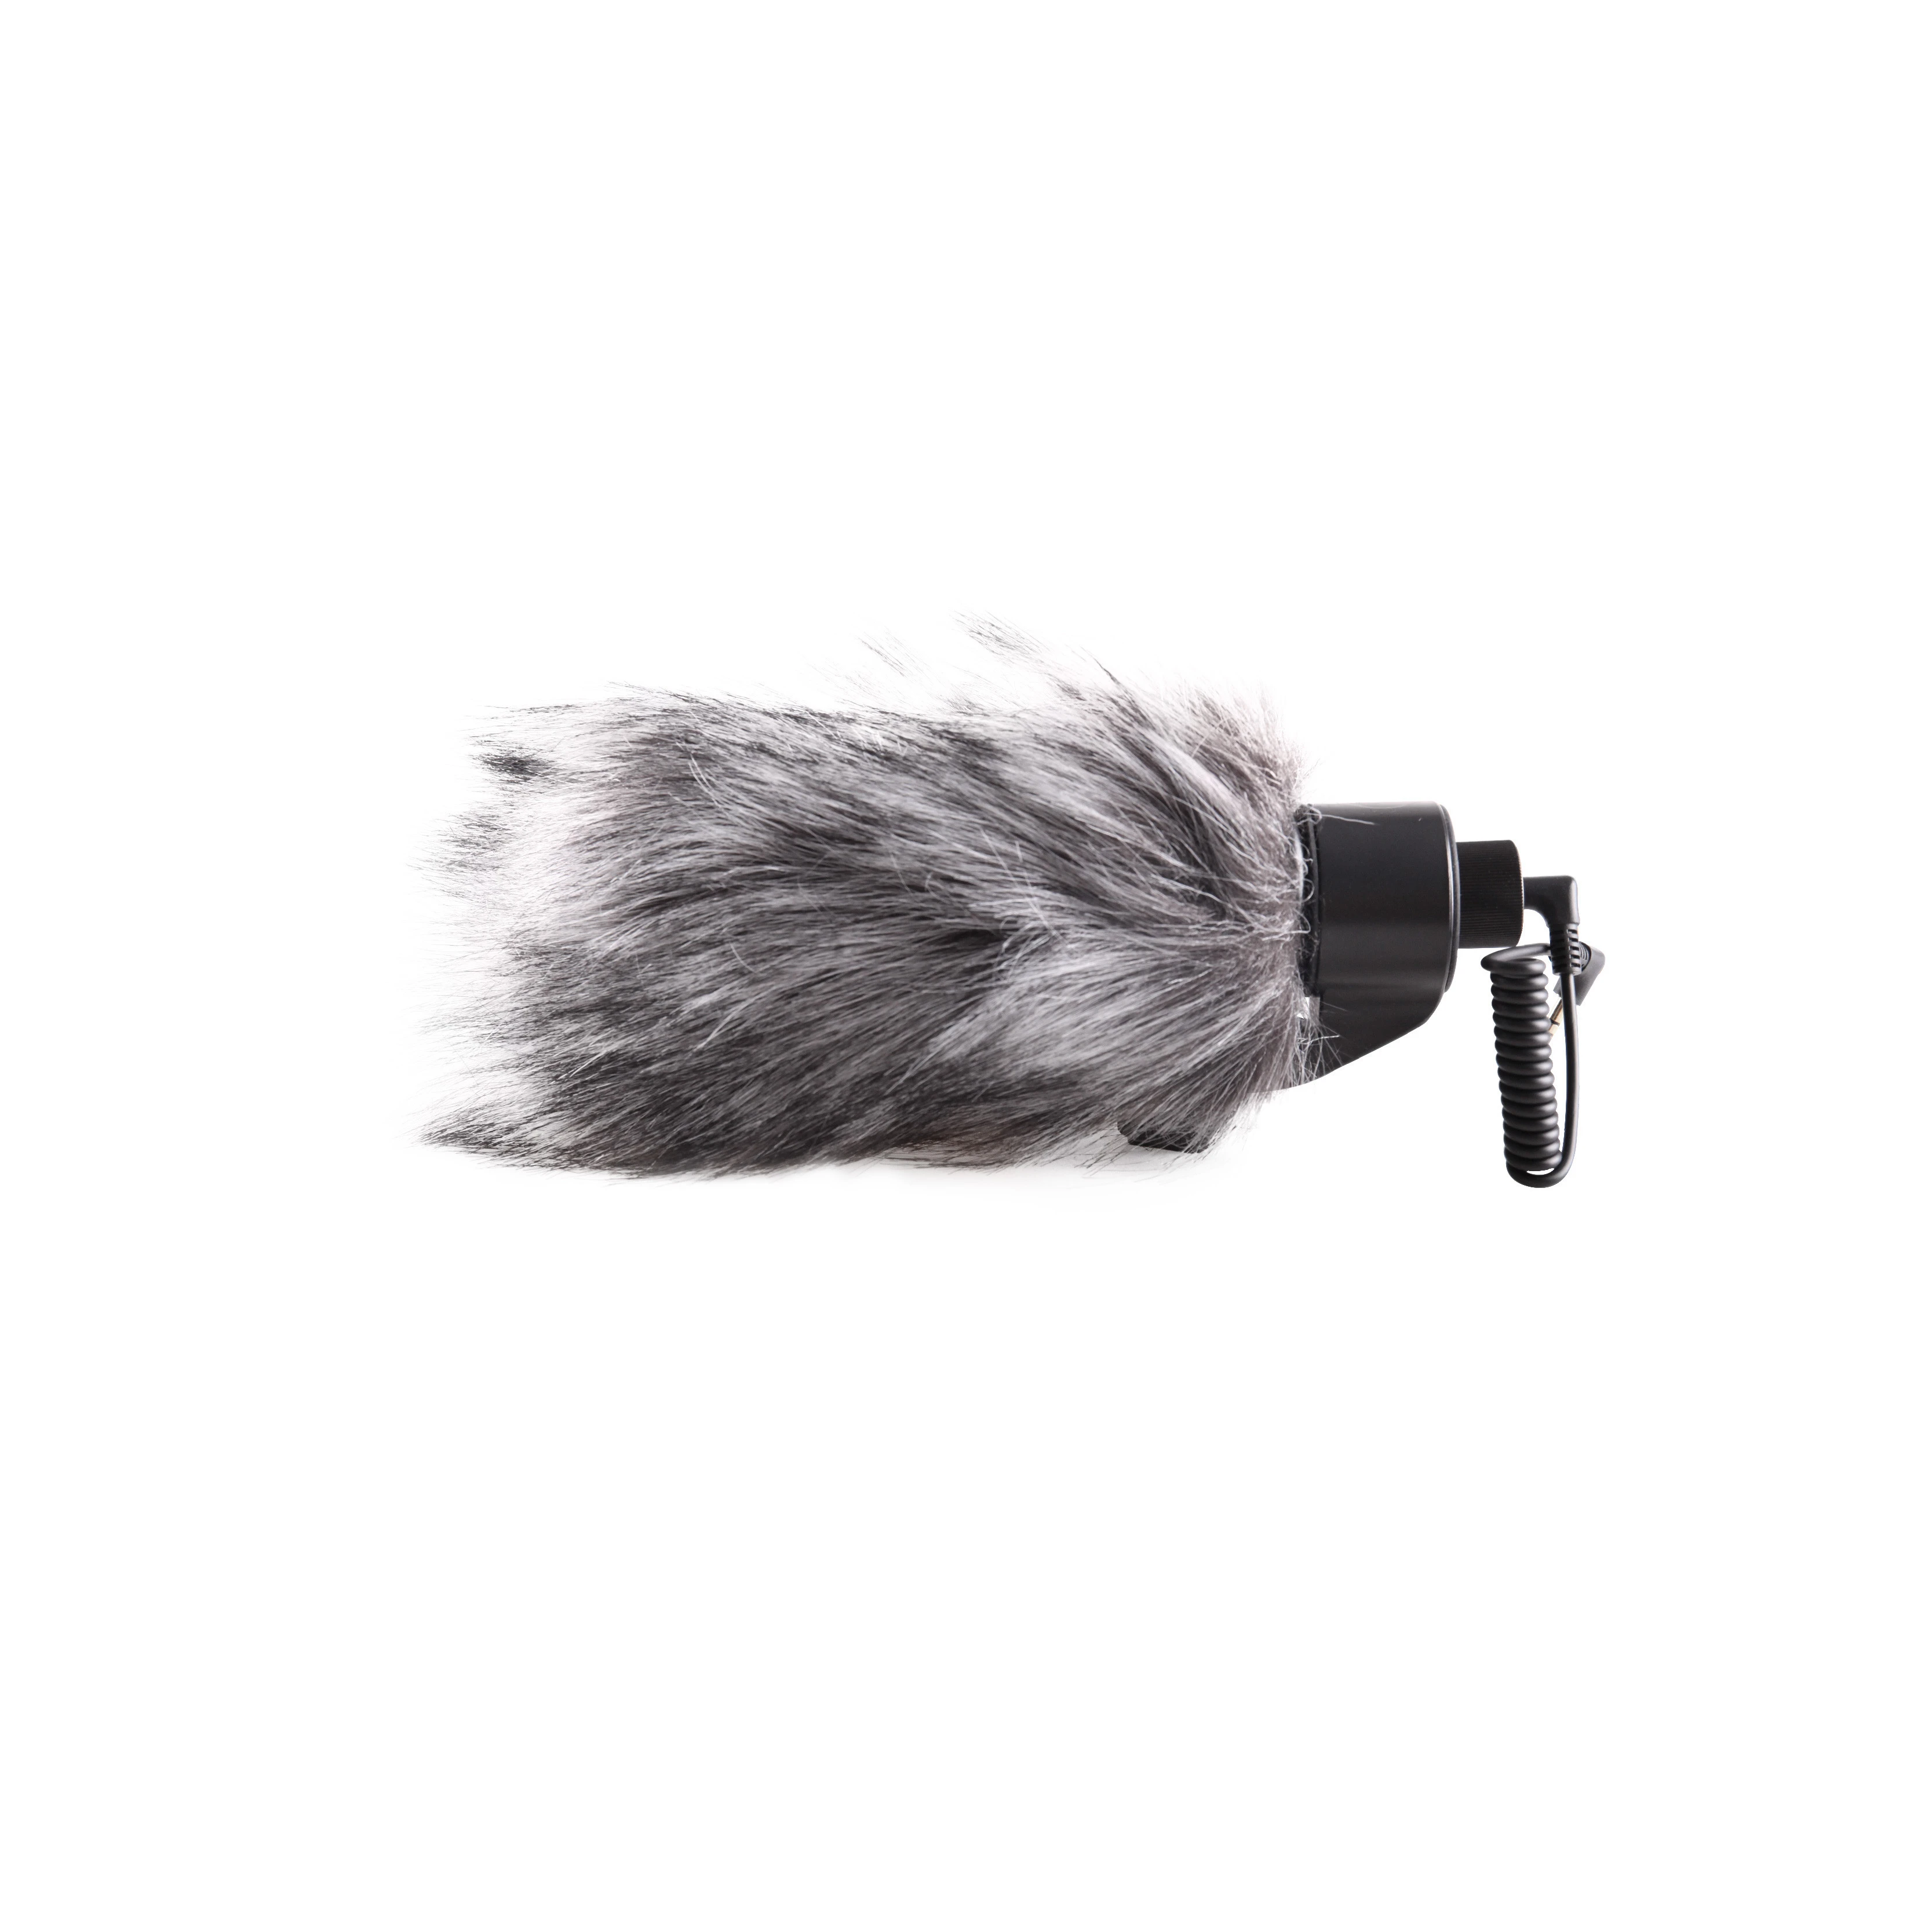 Super-Cardioid Directional microphone for interview and live streaming